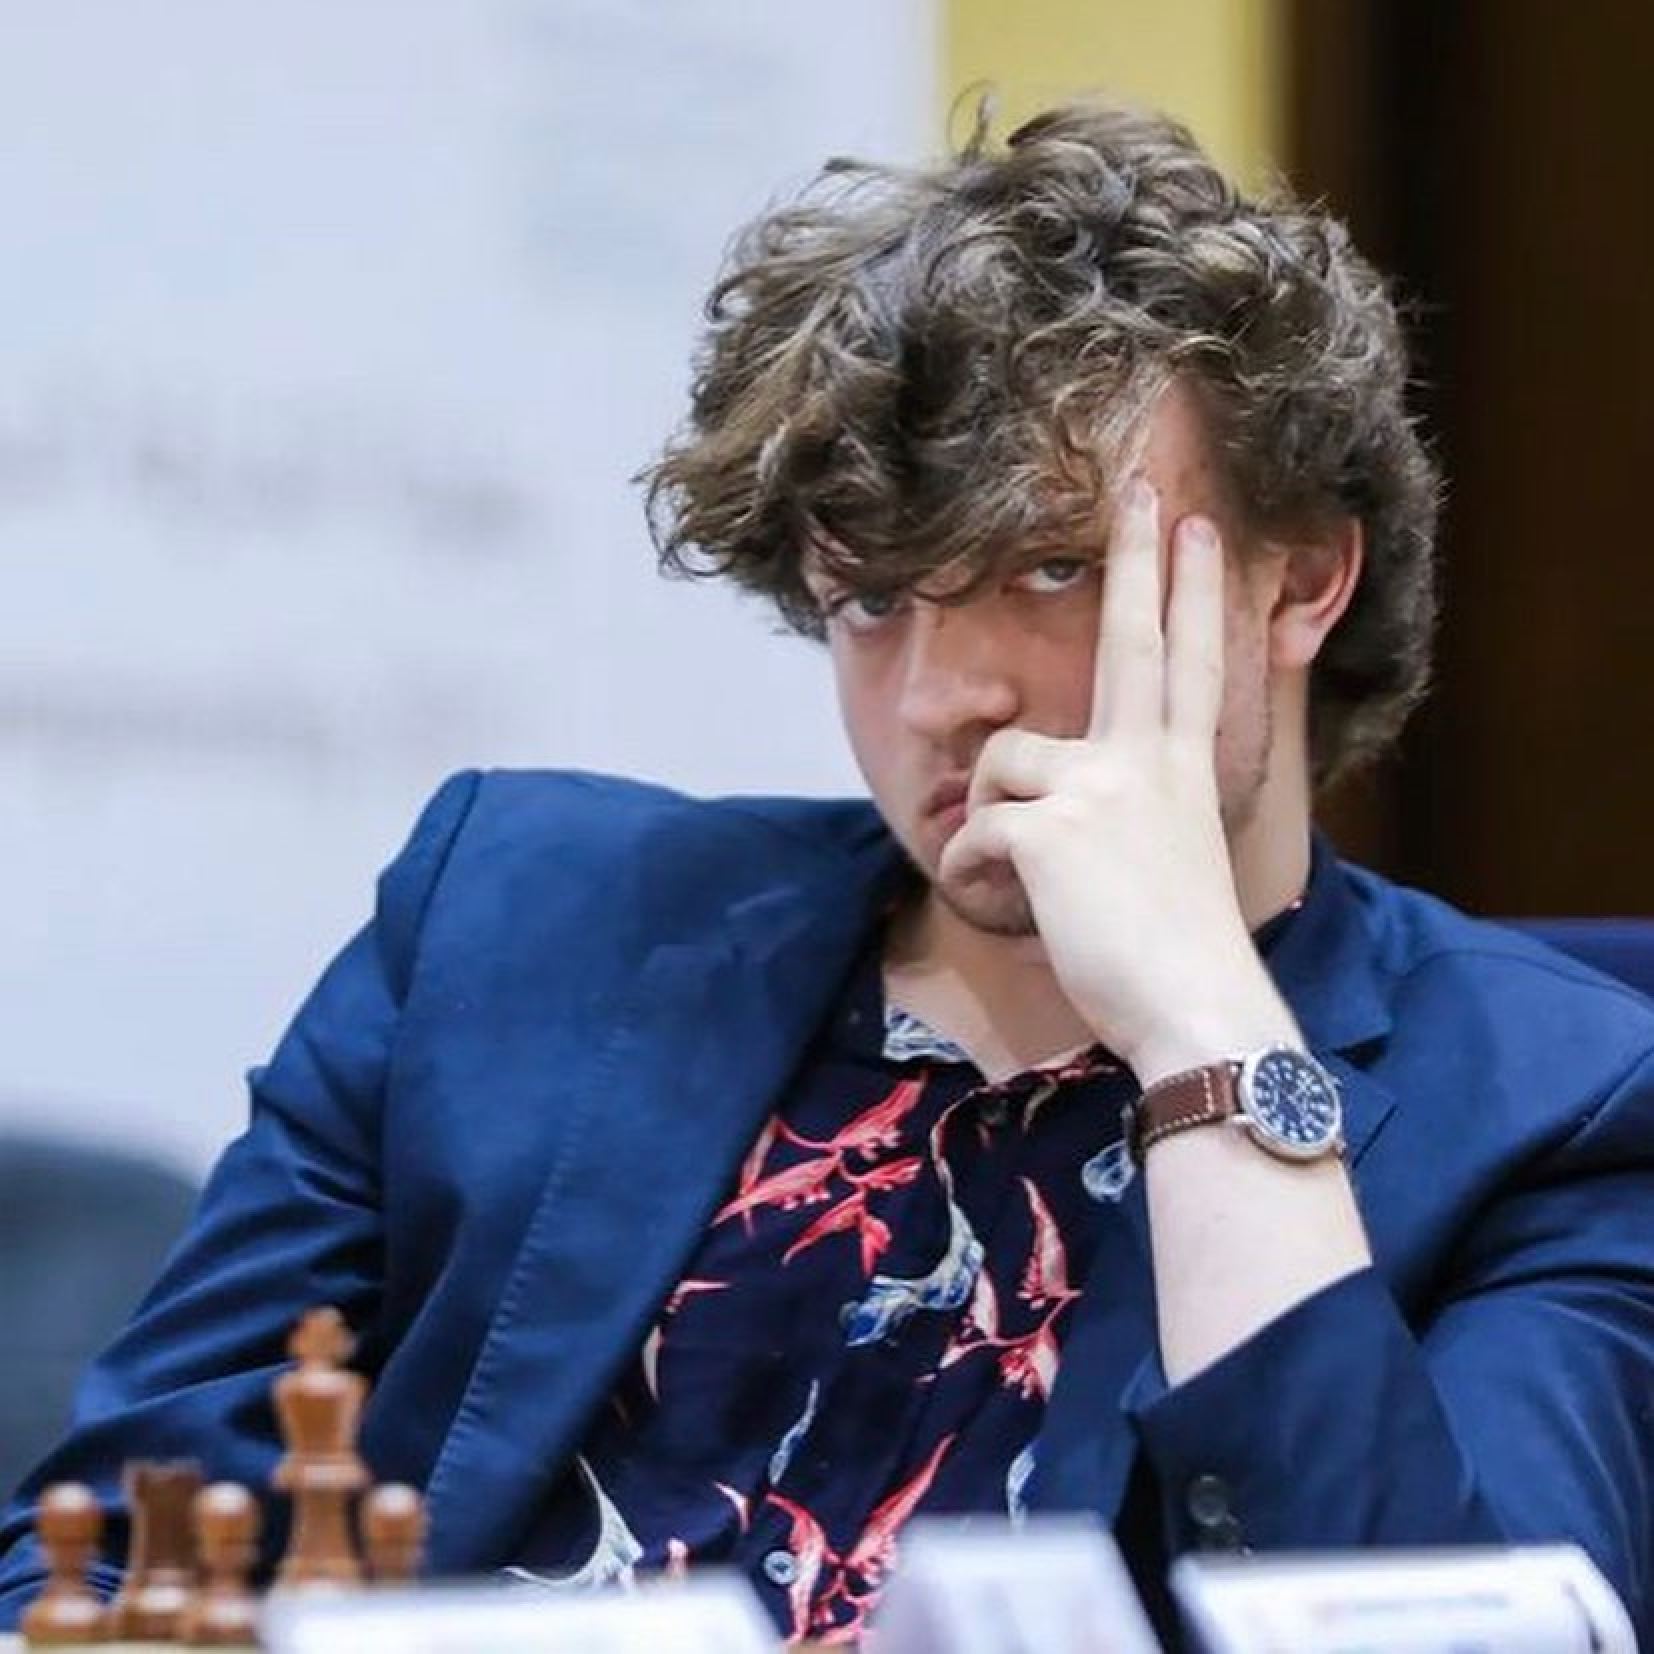 GM Hans Niemann on his Rapid Climb up the Chess Rankings and